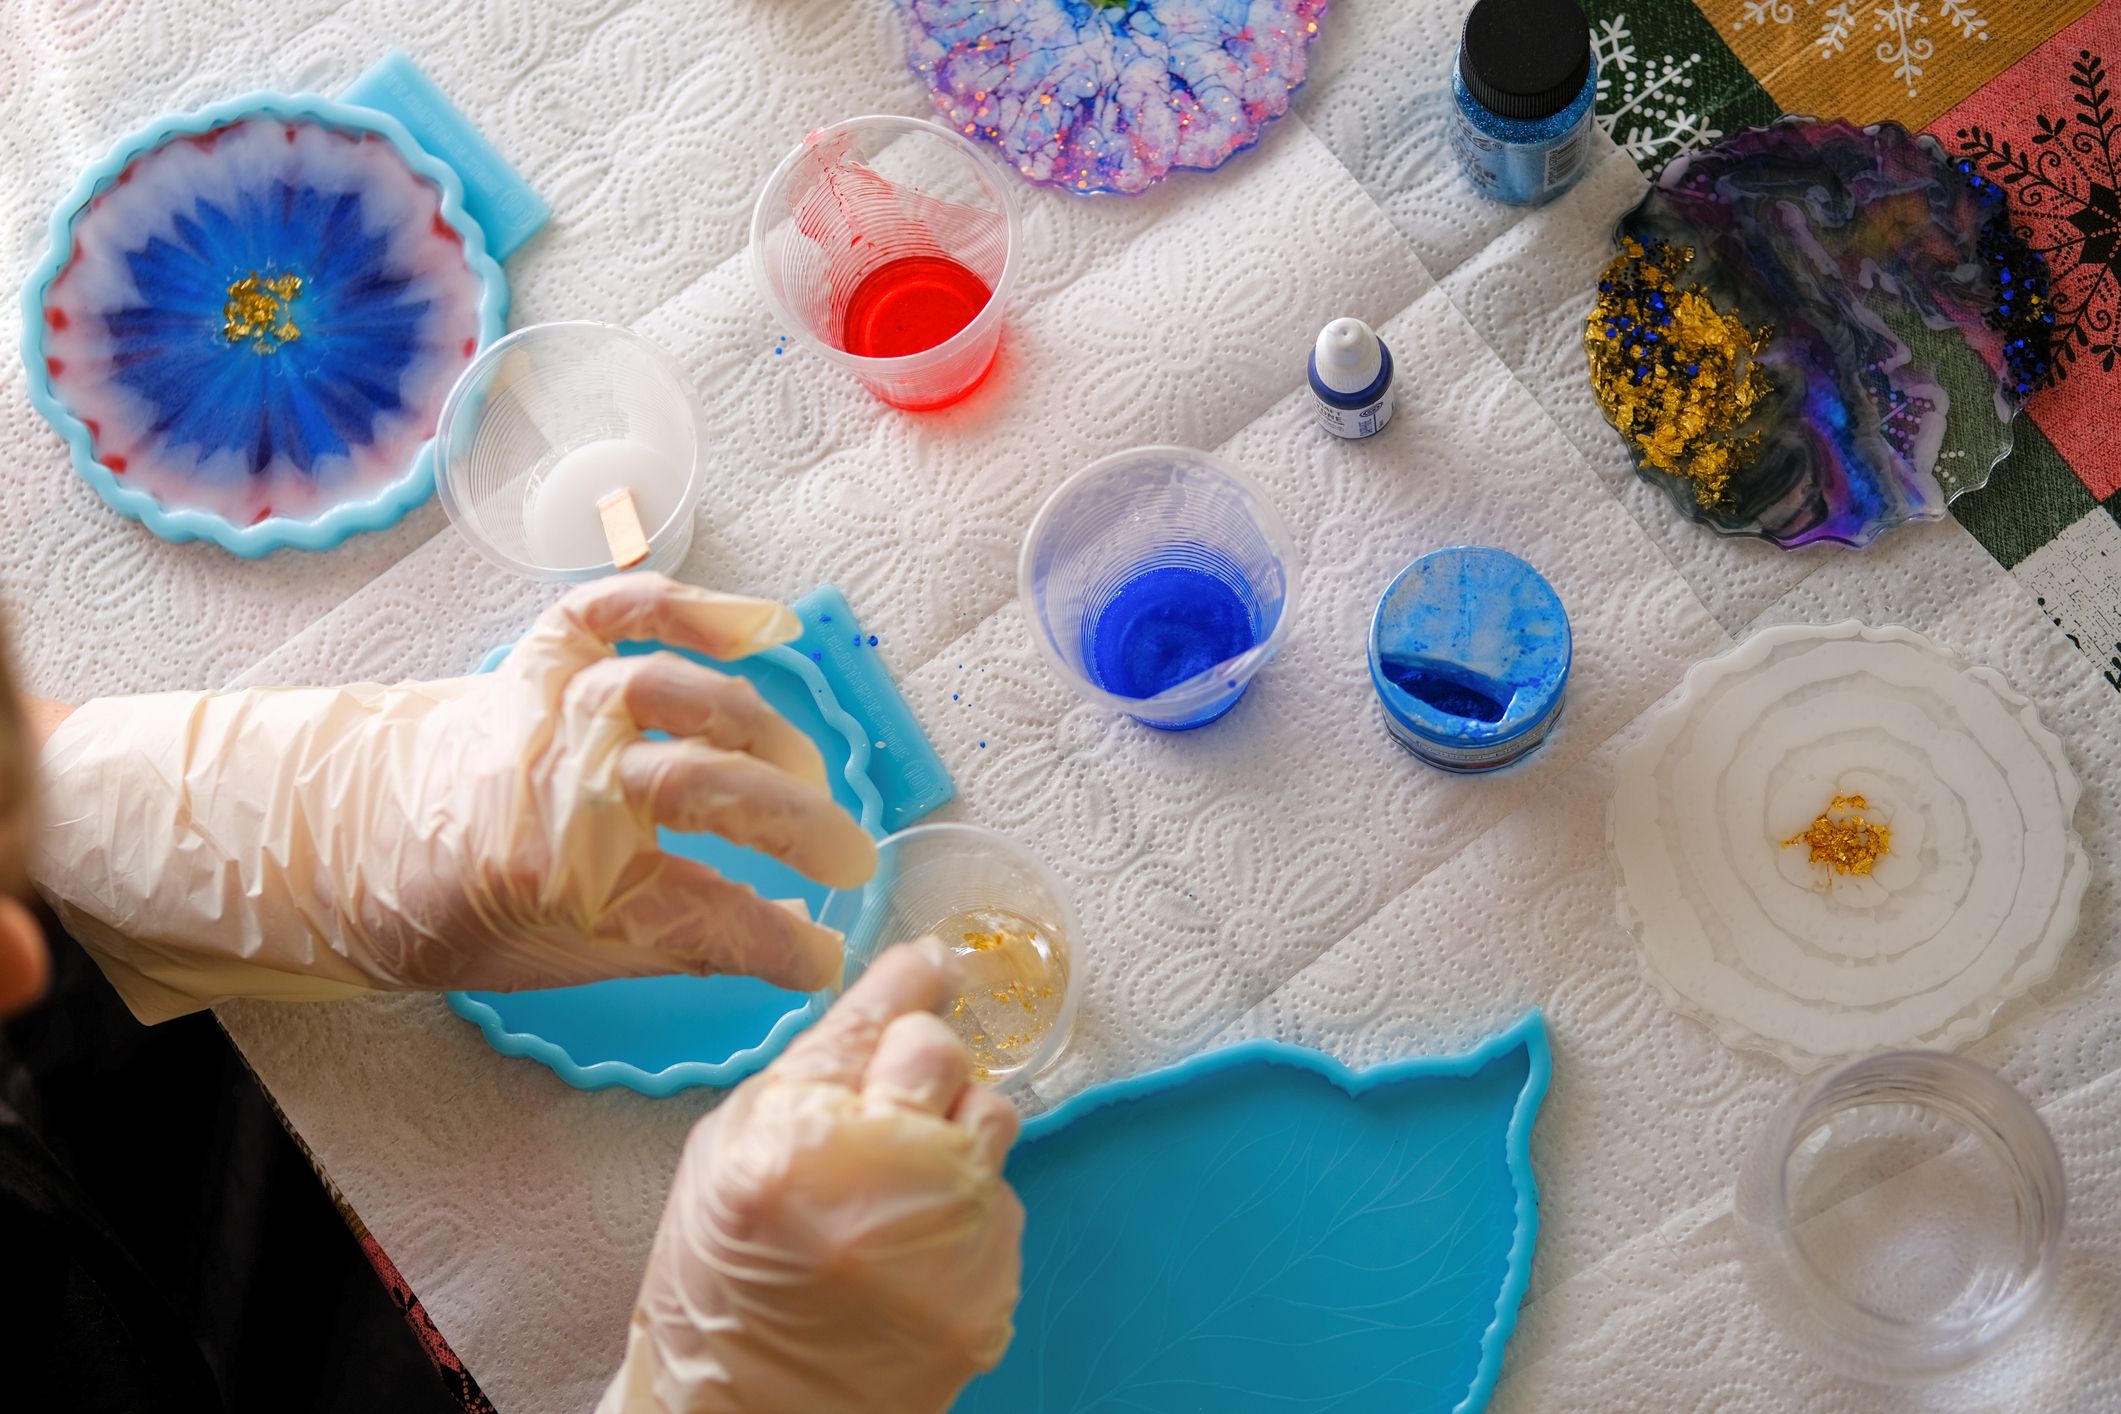 Brilliant resin craft ideas for beginners